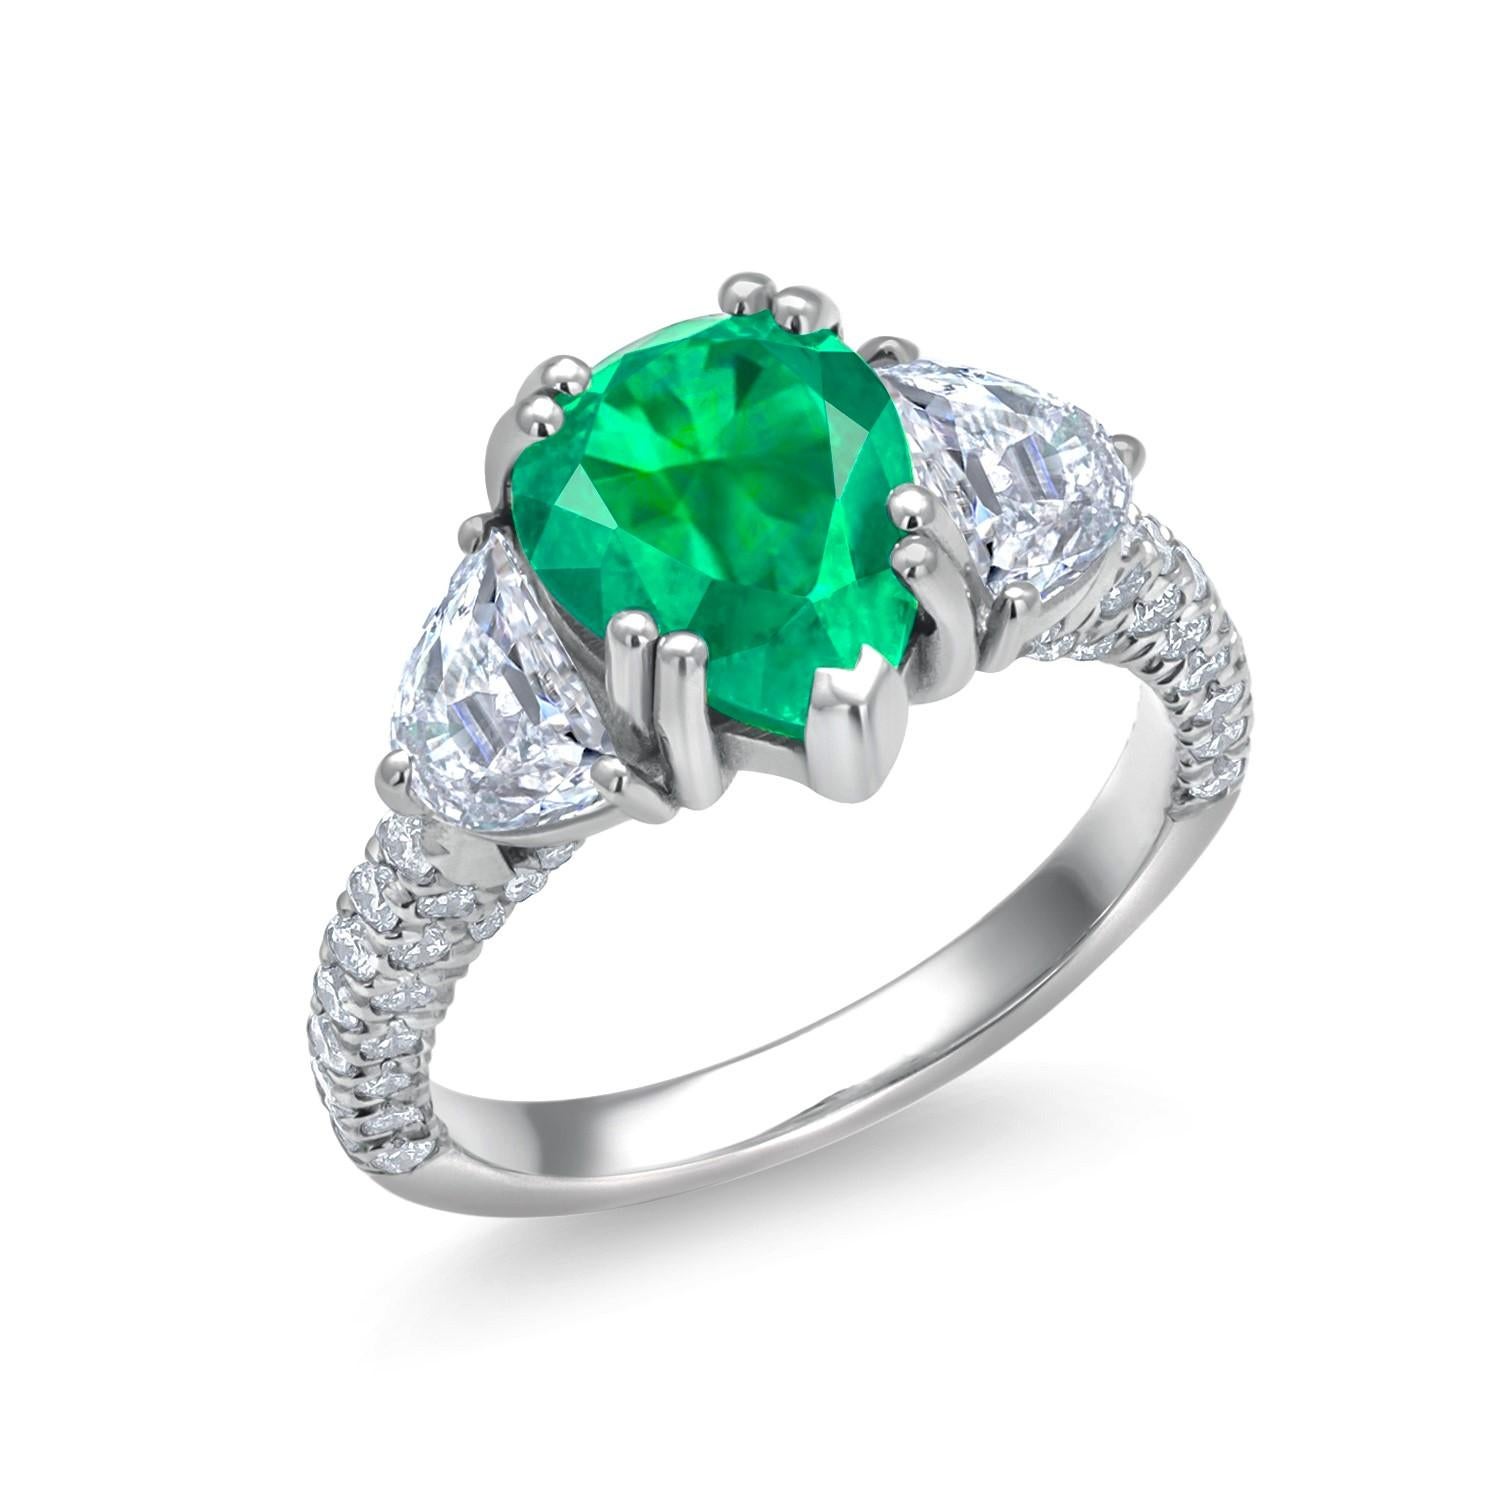 GIA Certified Colombian Pear Emerald Diamond 3.35 Carat 18 Karat Gold Ring For Sale 1